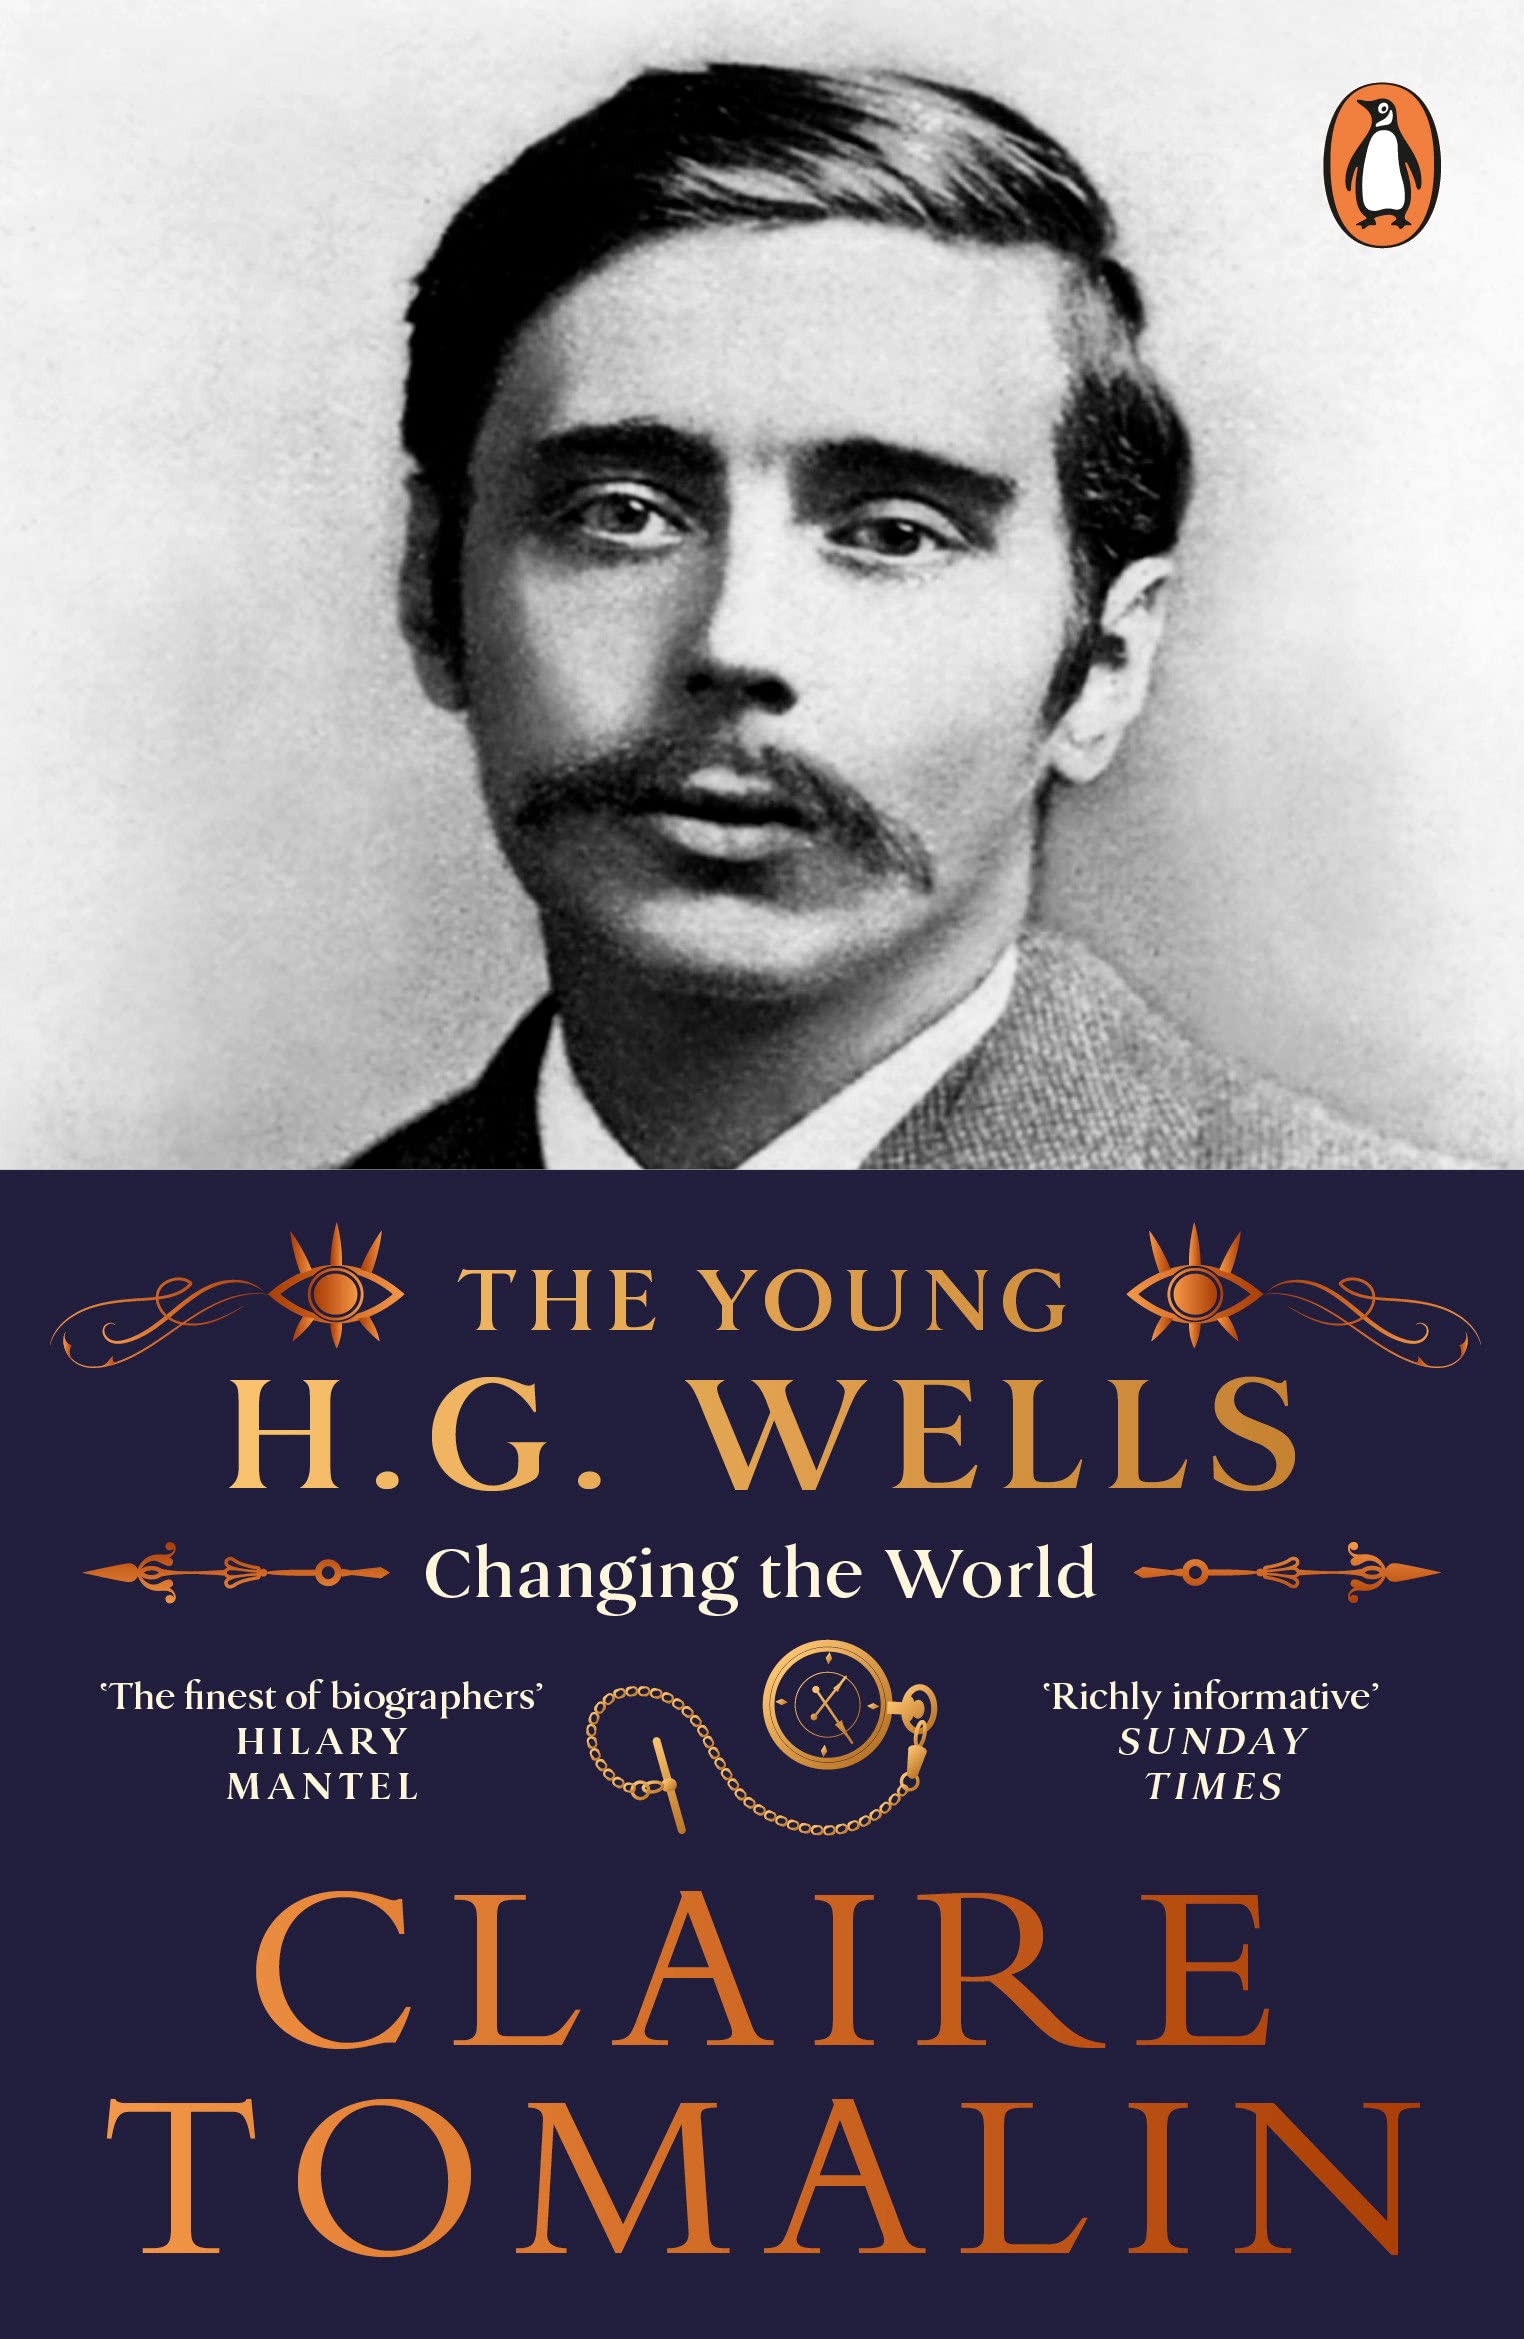 The Young H.G. Wells | Claire Tomalin